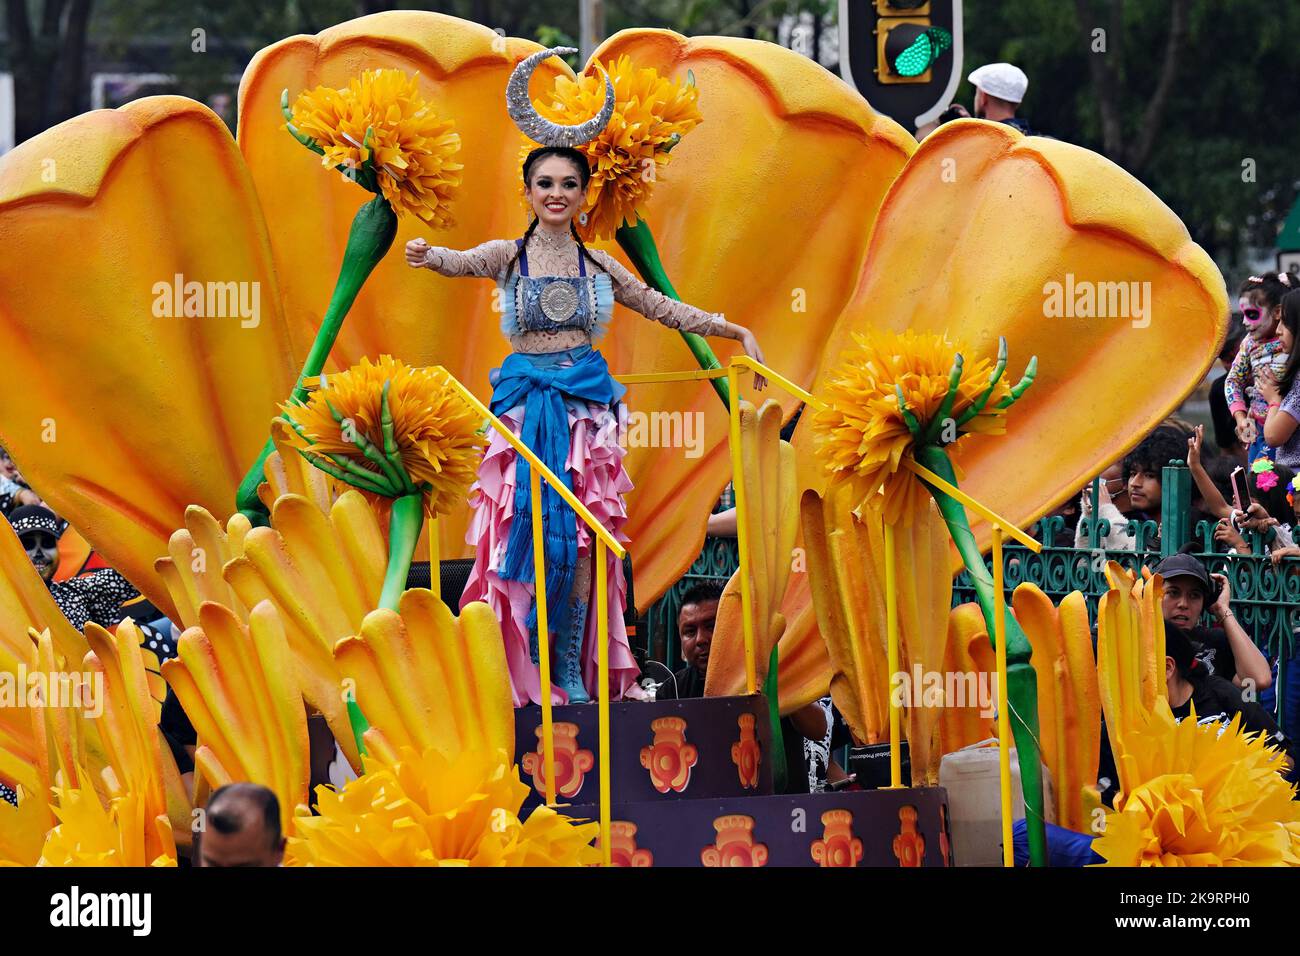 Mexico City, Mexico. 29th Oct, 2022. The Beauty Queen rides in a parade float of giant marigolds during the Grand Parade of the Dead to celebrate Dia de los Muertos holiday on Paseo de la Reforma, October 29, 2022 in Mexico City, Mexico. Credit: Richard Ellis/Richard Ellis/Alamy Live News Stock Photo